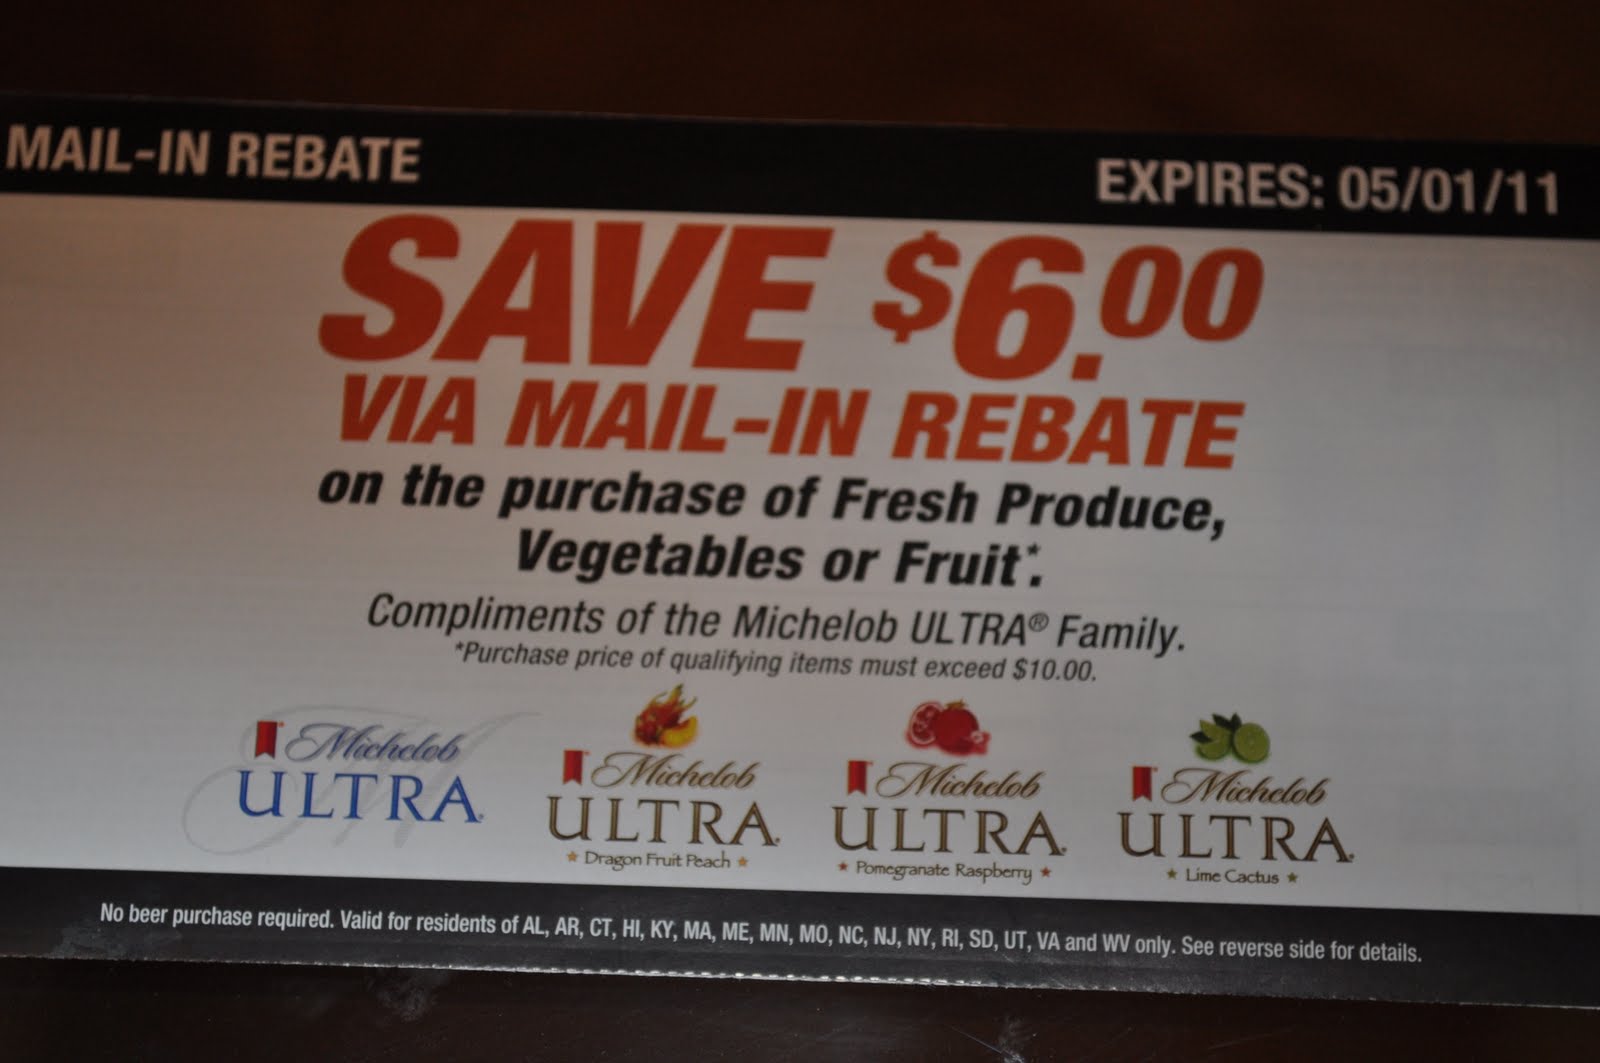 coupon-stl-michelob-beer-rebate-6-on-fresh-produce